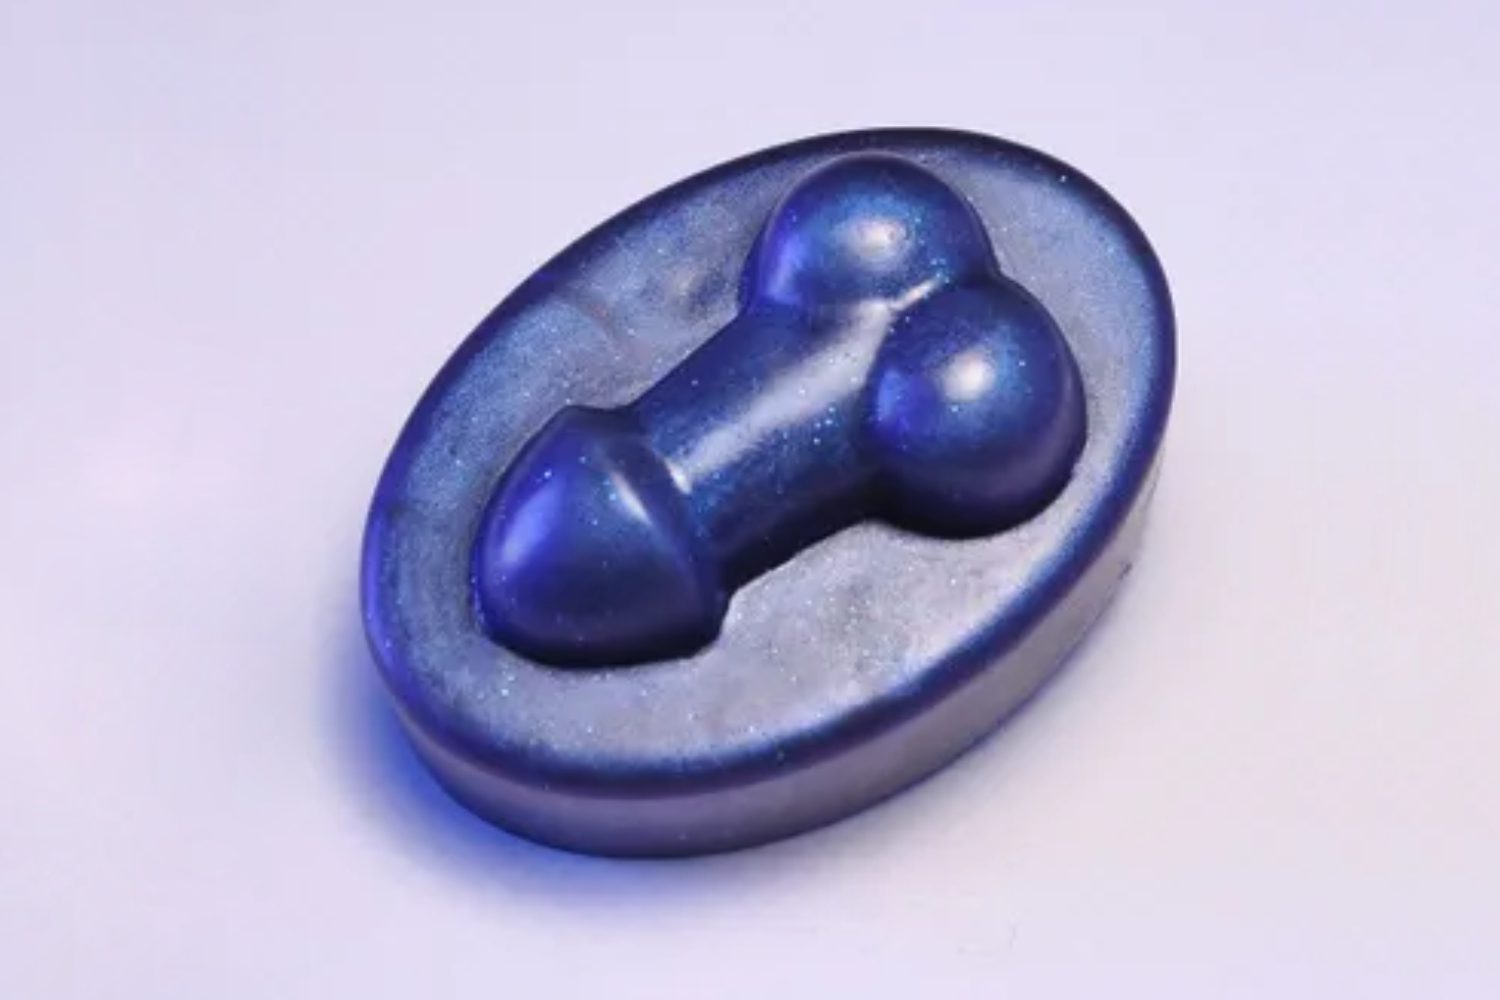 A blue soap with two balls in it